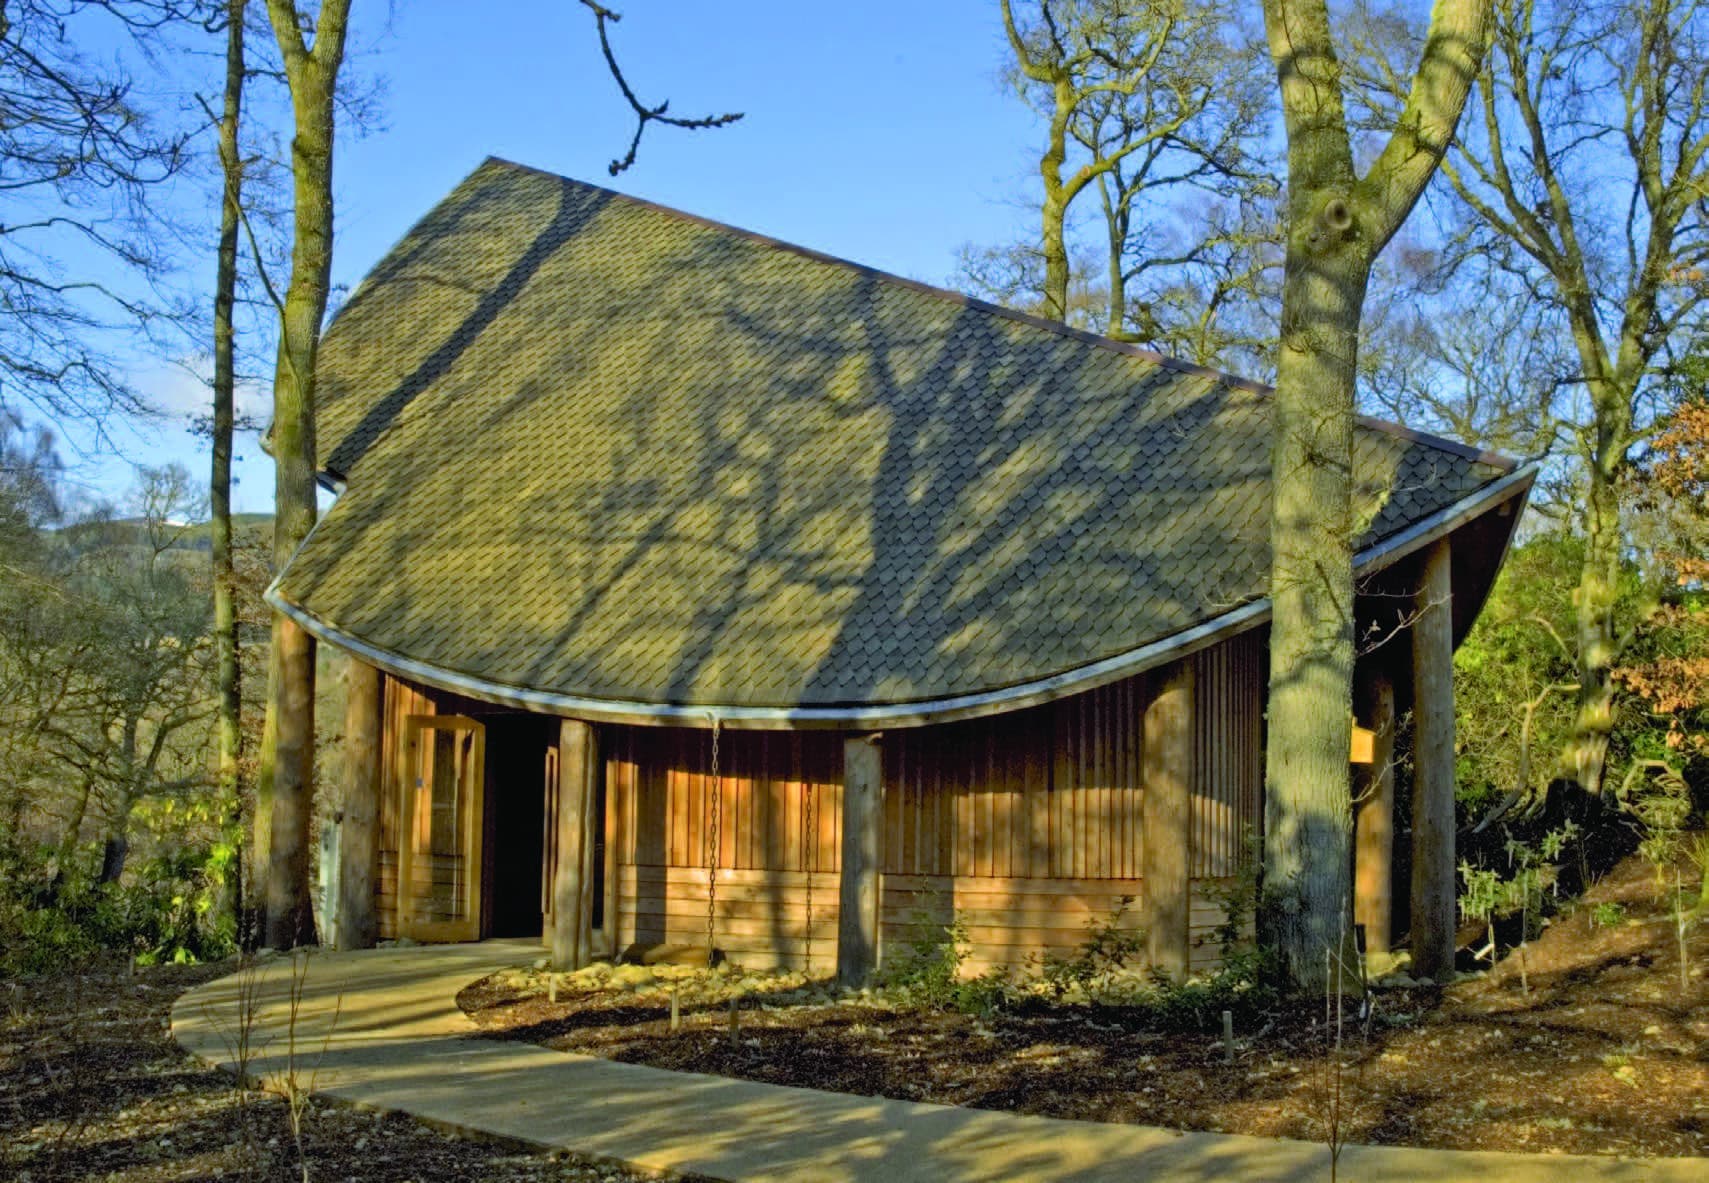 A building with a leaf shaped roof in a forest. A wooden pathway leads up to the building.